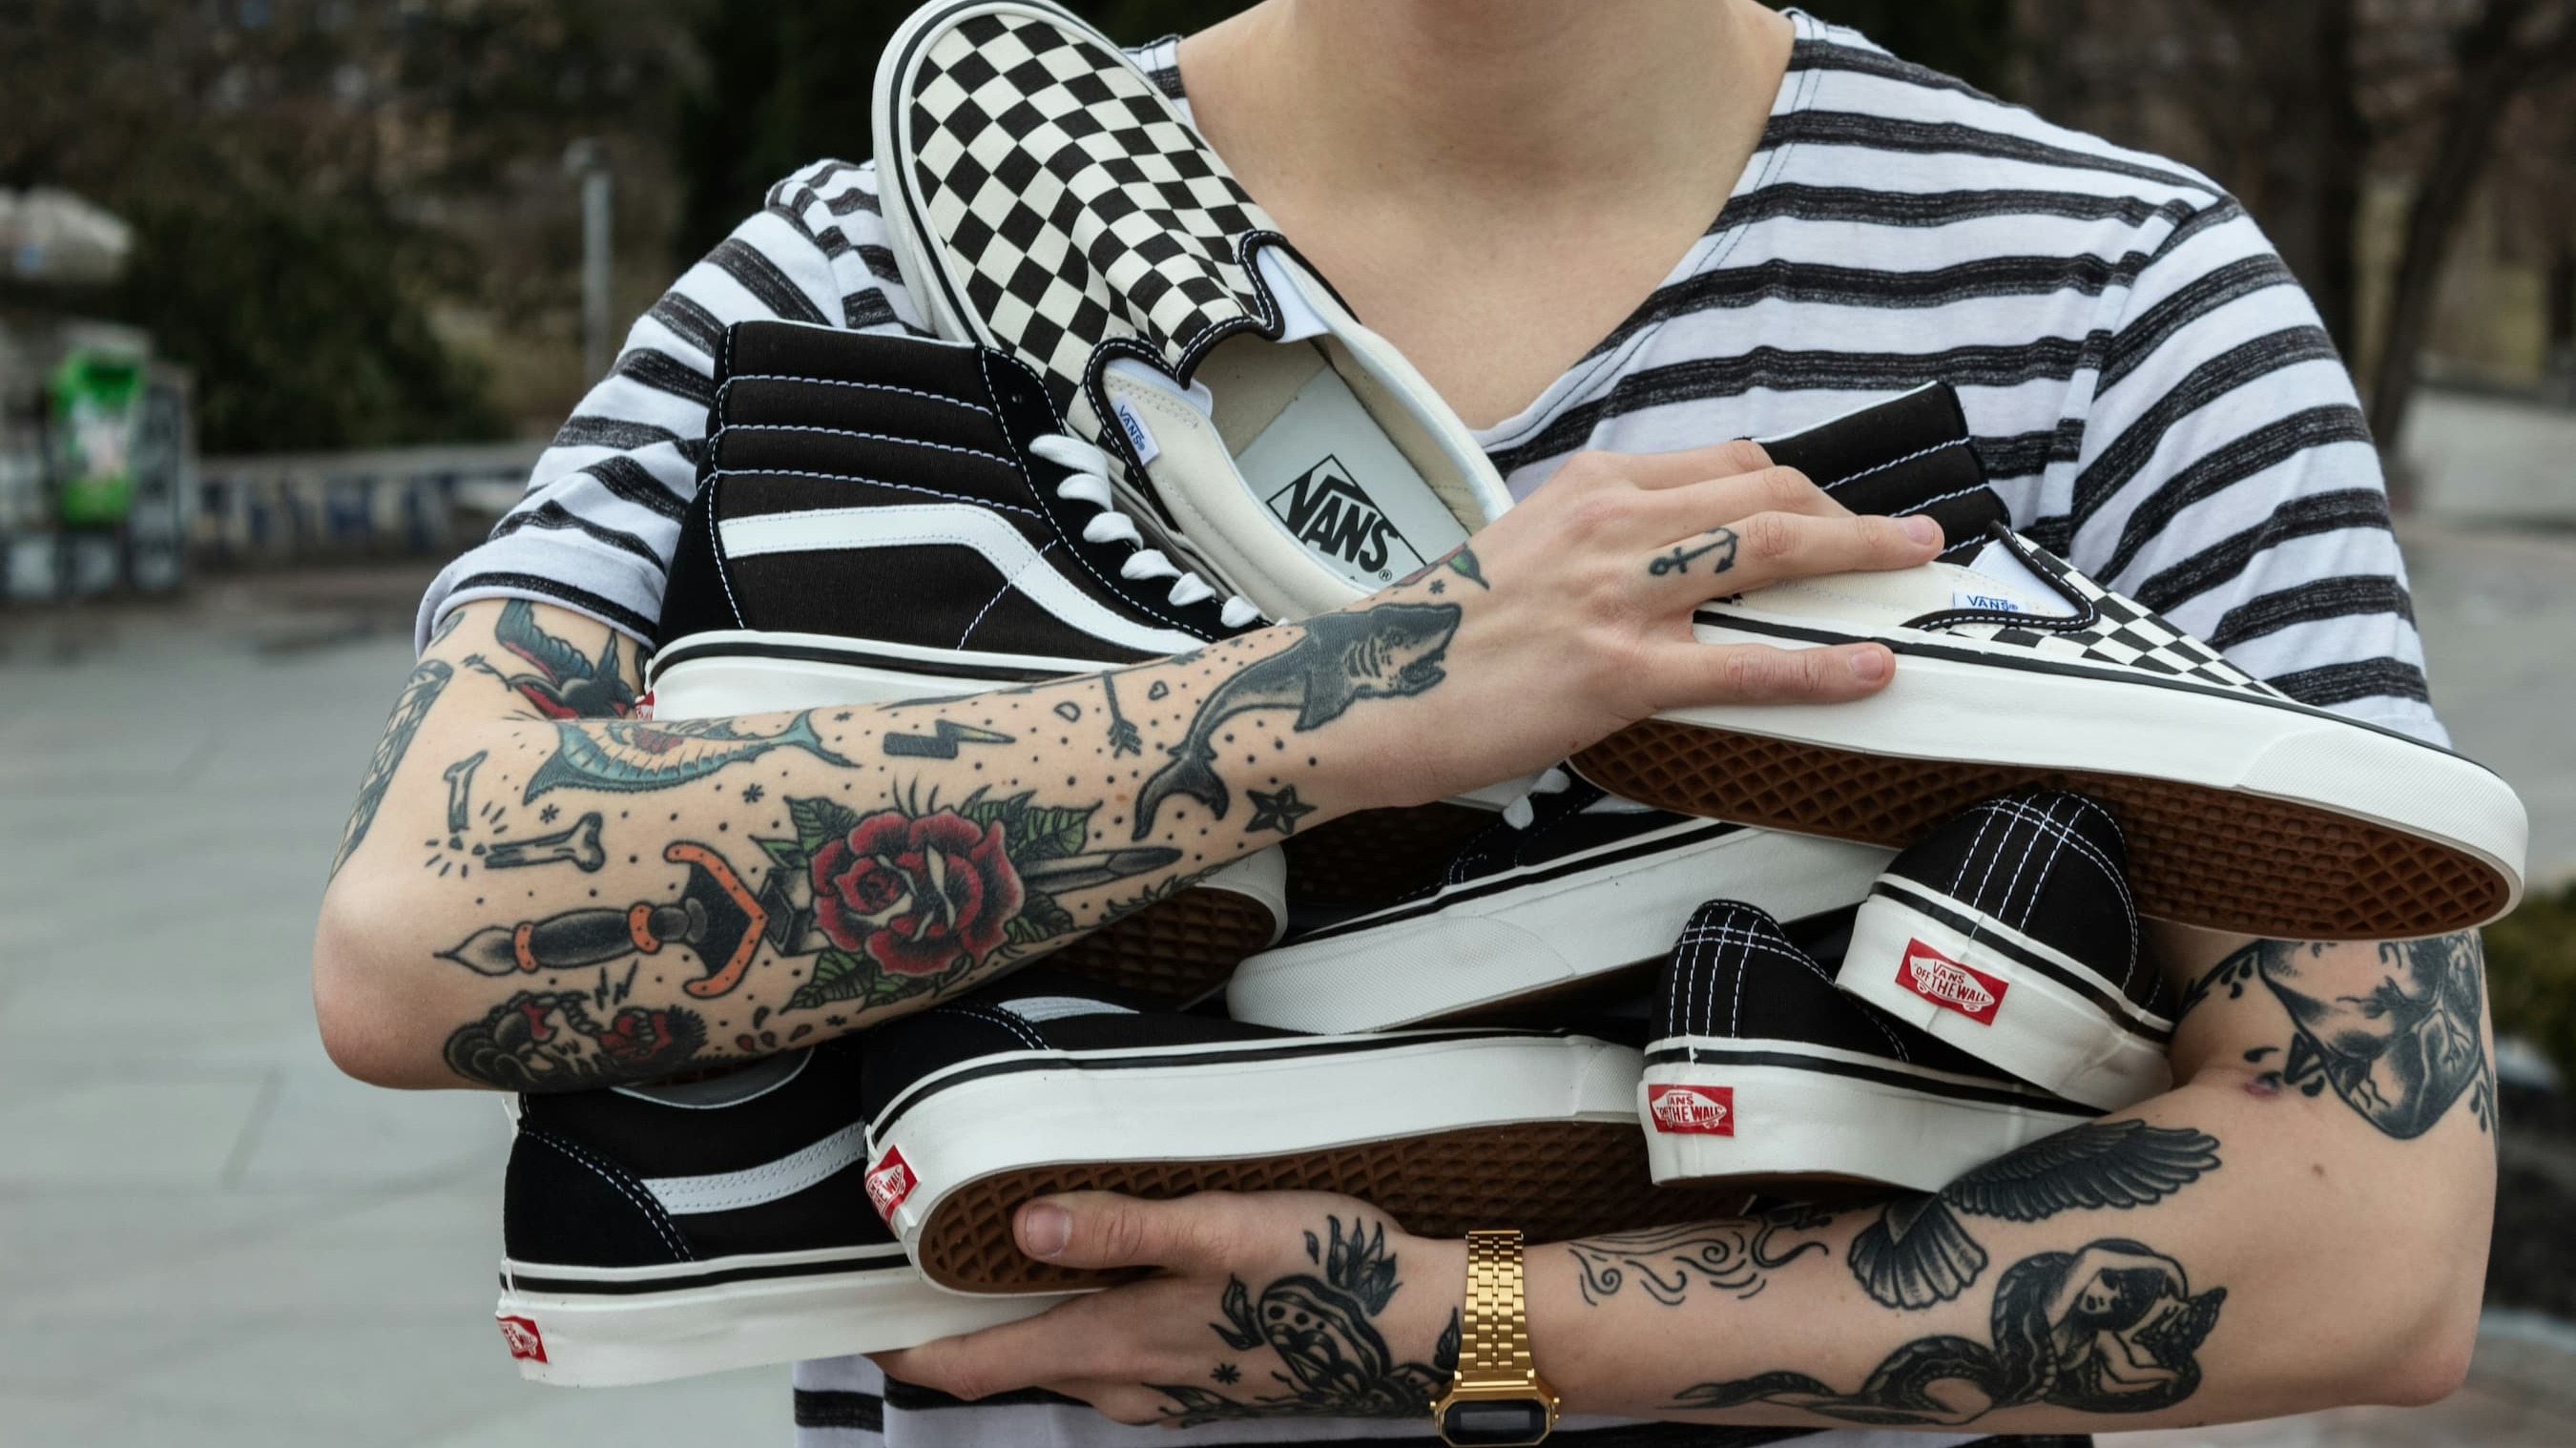 Vans USA from Mexico